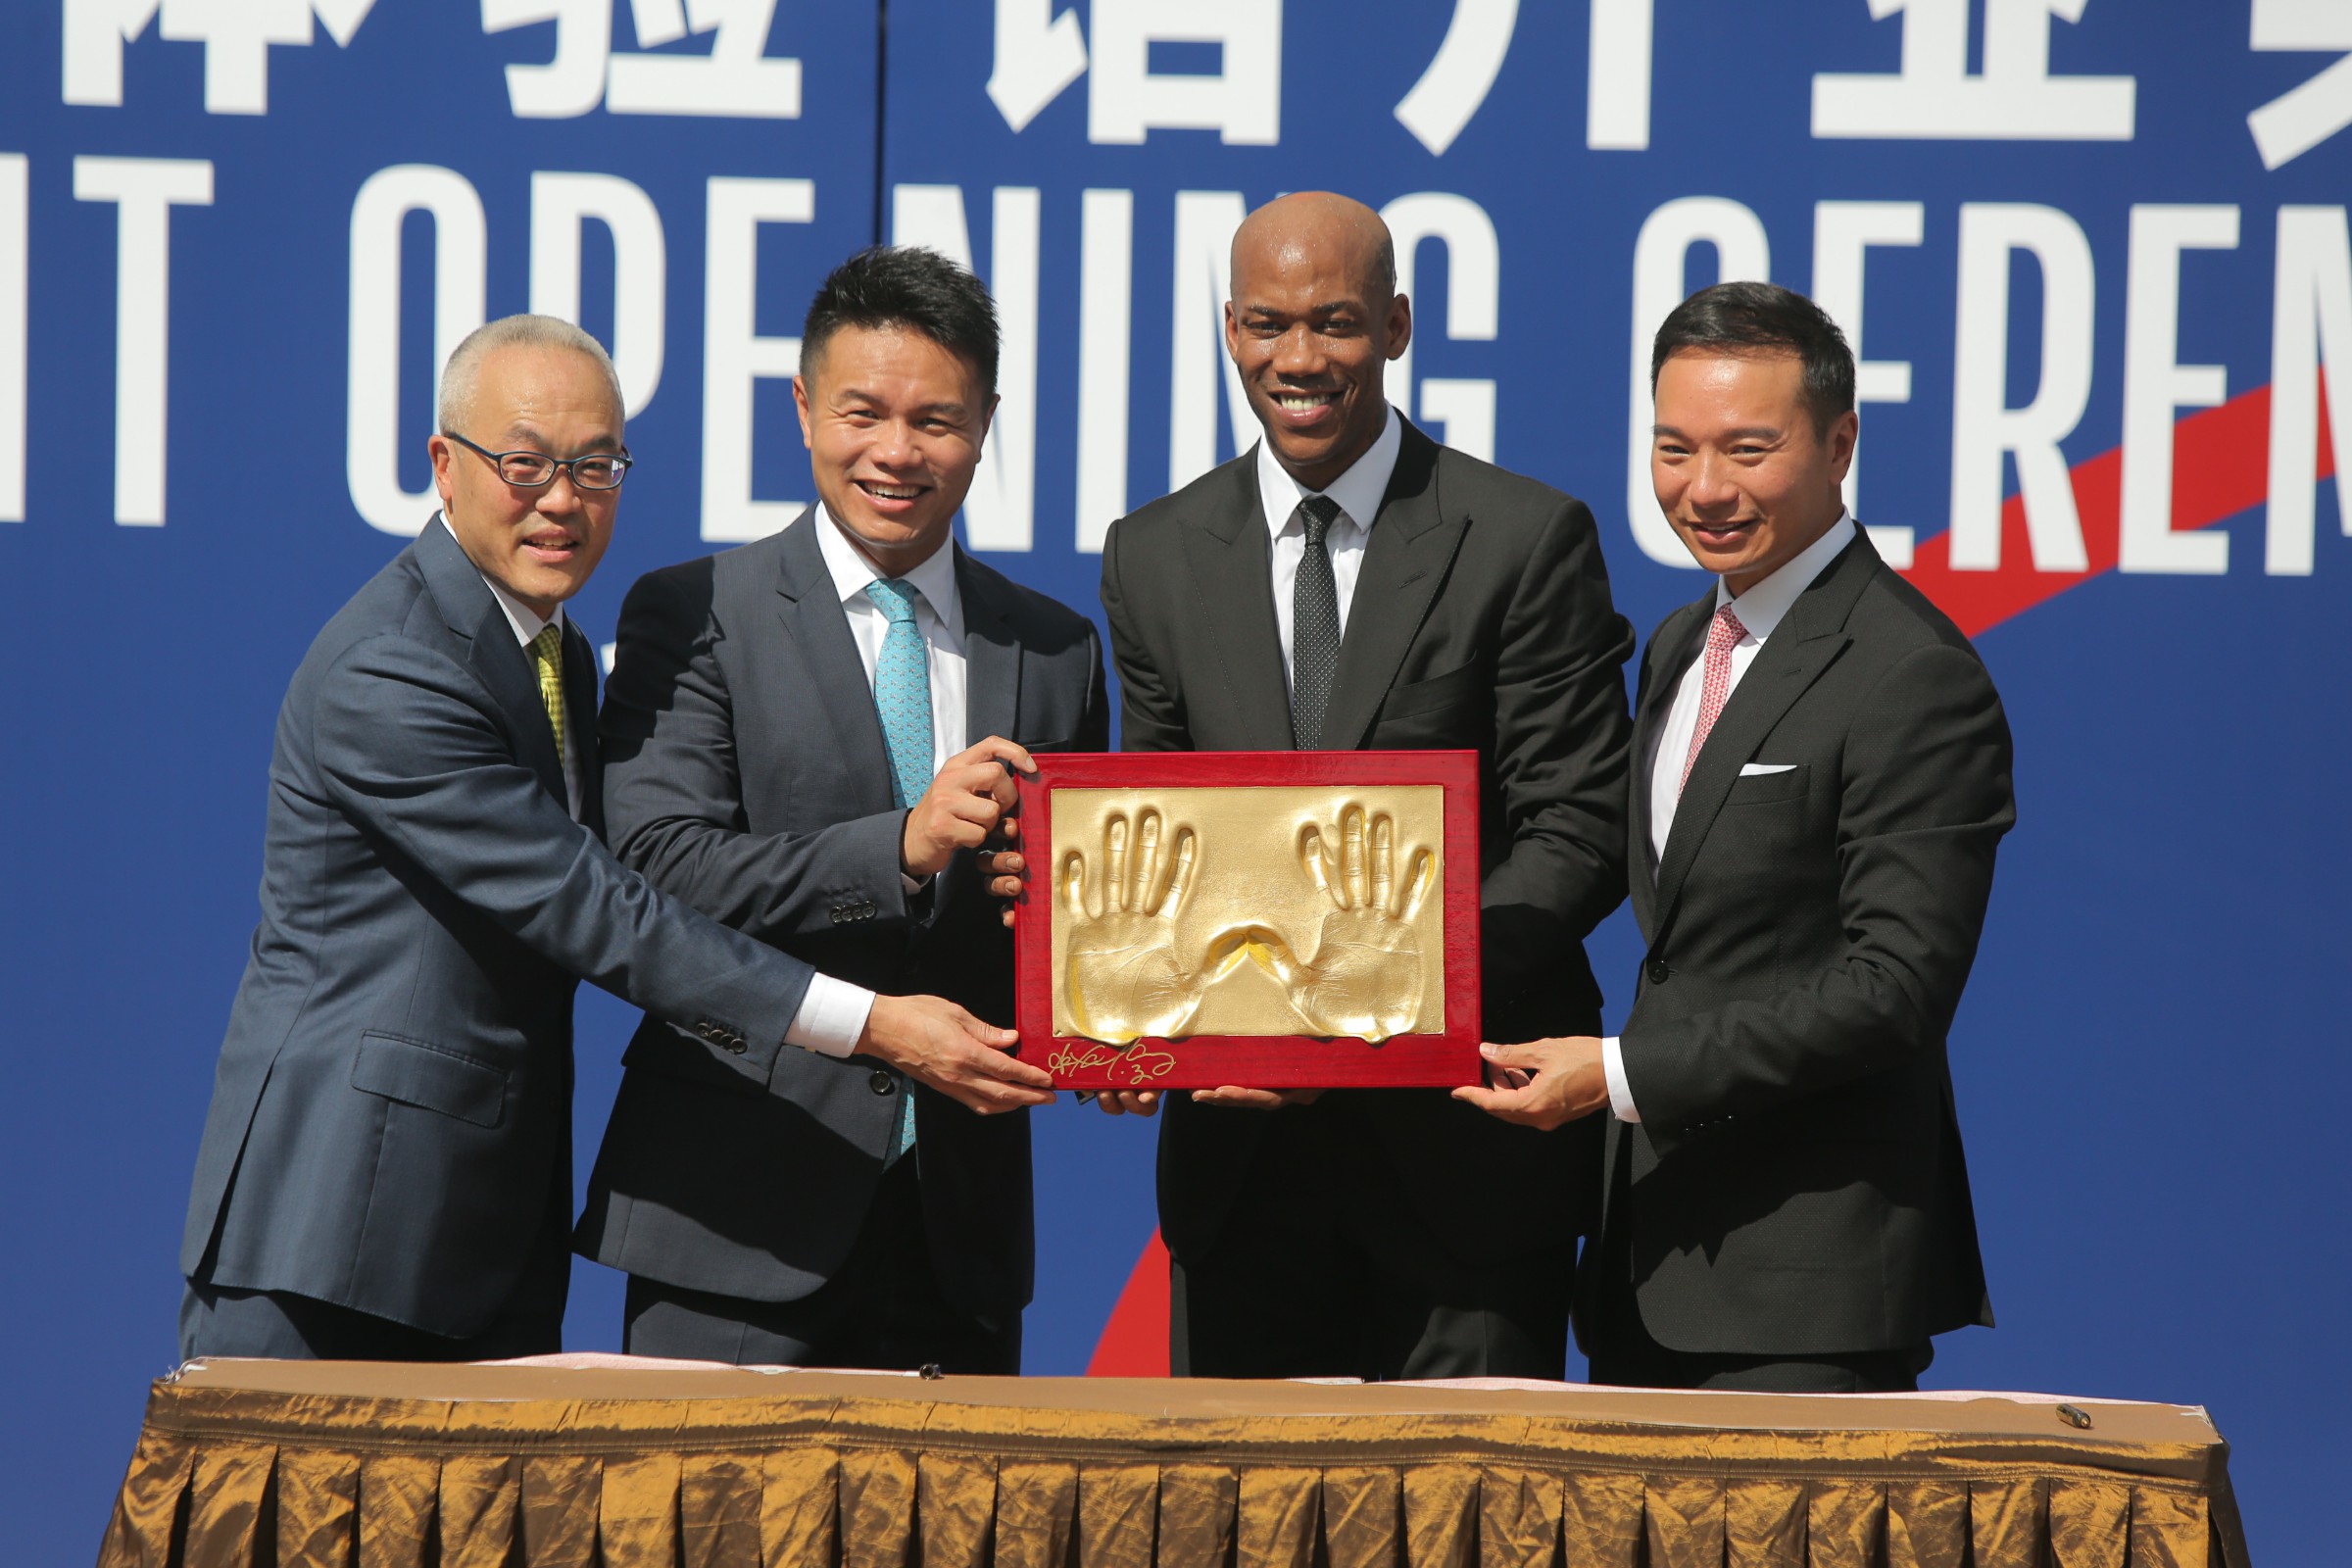 Photo 7 – Official opening of the NBA Exhibit at Mission Hills Haikou in Hainan, China